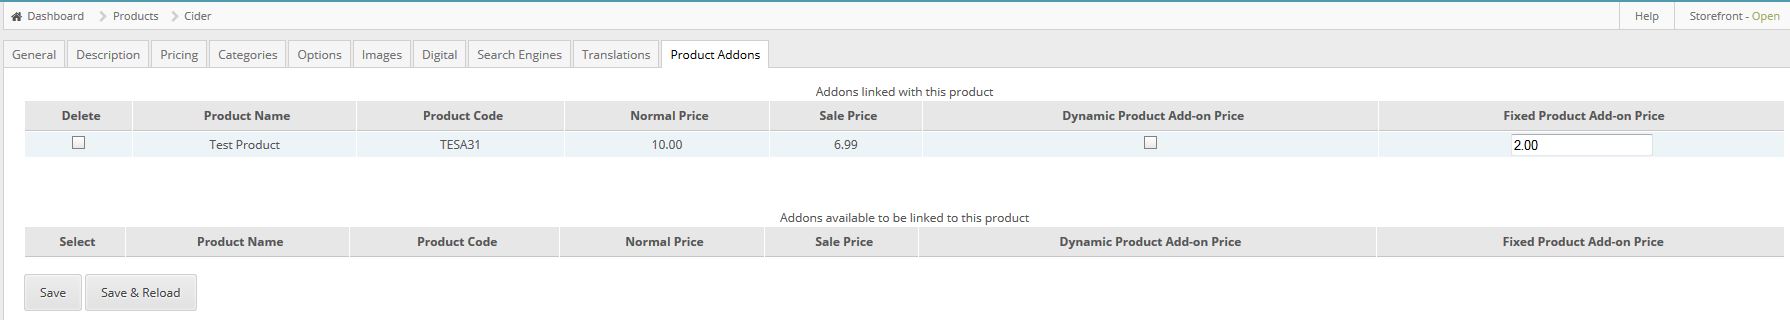 Product Addons - Easily Purchase Related Products (Kit Builder) Image